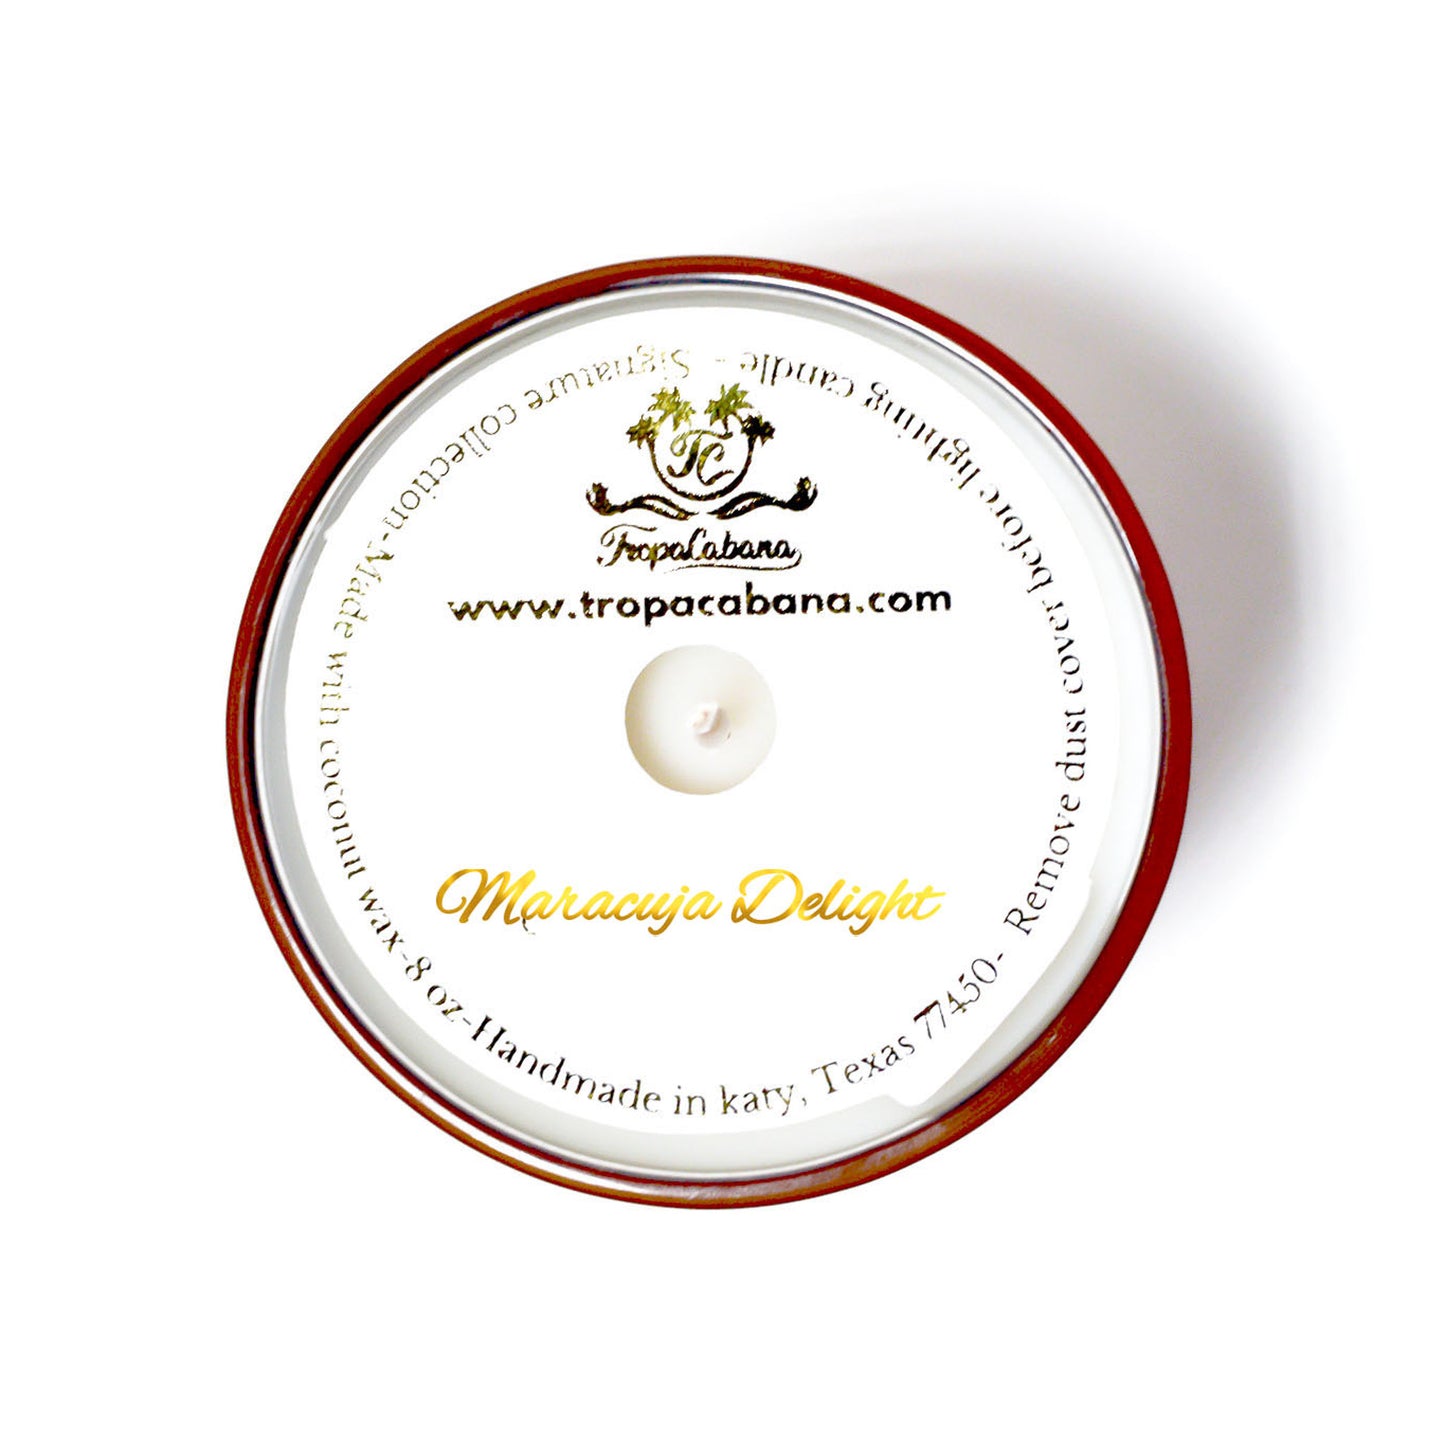 8 oz Maracuja Delight Candles, Signature Collection, Fruity Fragrance, Food Fragrance, Unisex, Gifts for Him, Gifts for her, Gifts for travelers, Special Occasion Gift, Luxury Candle, Vegan Candle, Coconut Wax Candle, Scented Candle, Aromatherapy, Passion Fruit,Tropical Fruits, sugar, TropaCabana, Gold Glass Jar Candle, Made in the US, Vet Owned Business, Woman Owned Business, Brazilian Owned Business, Small Business, Support Local, Support Small, Handmade, Handpoured Candles.